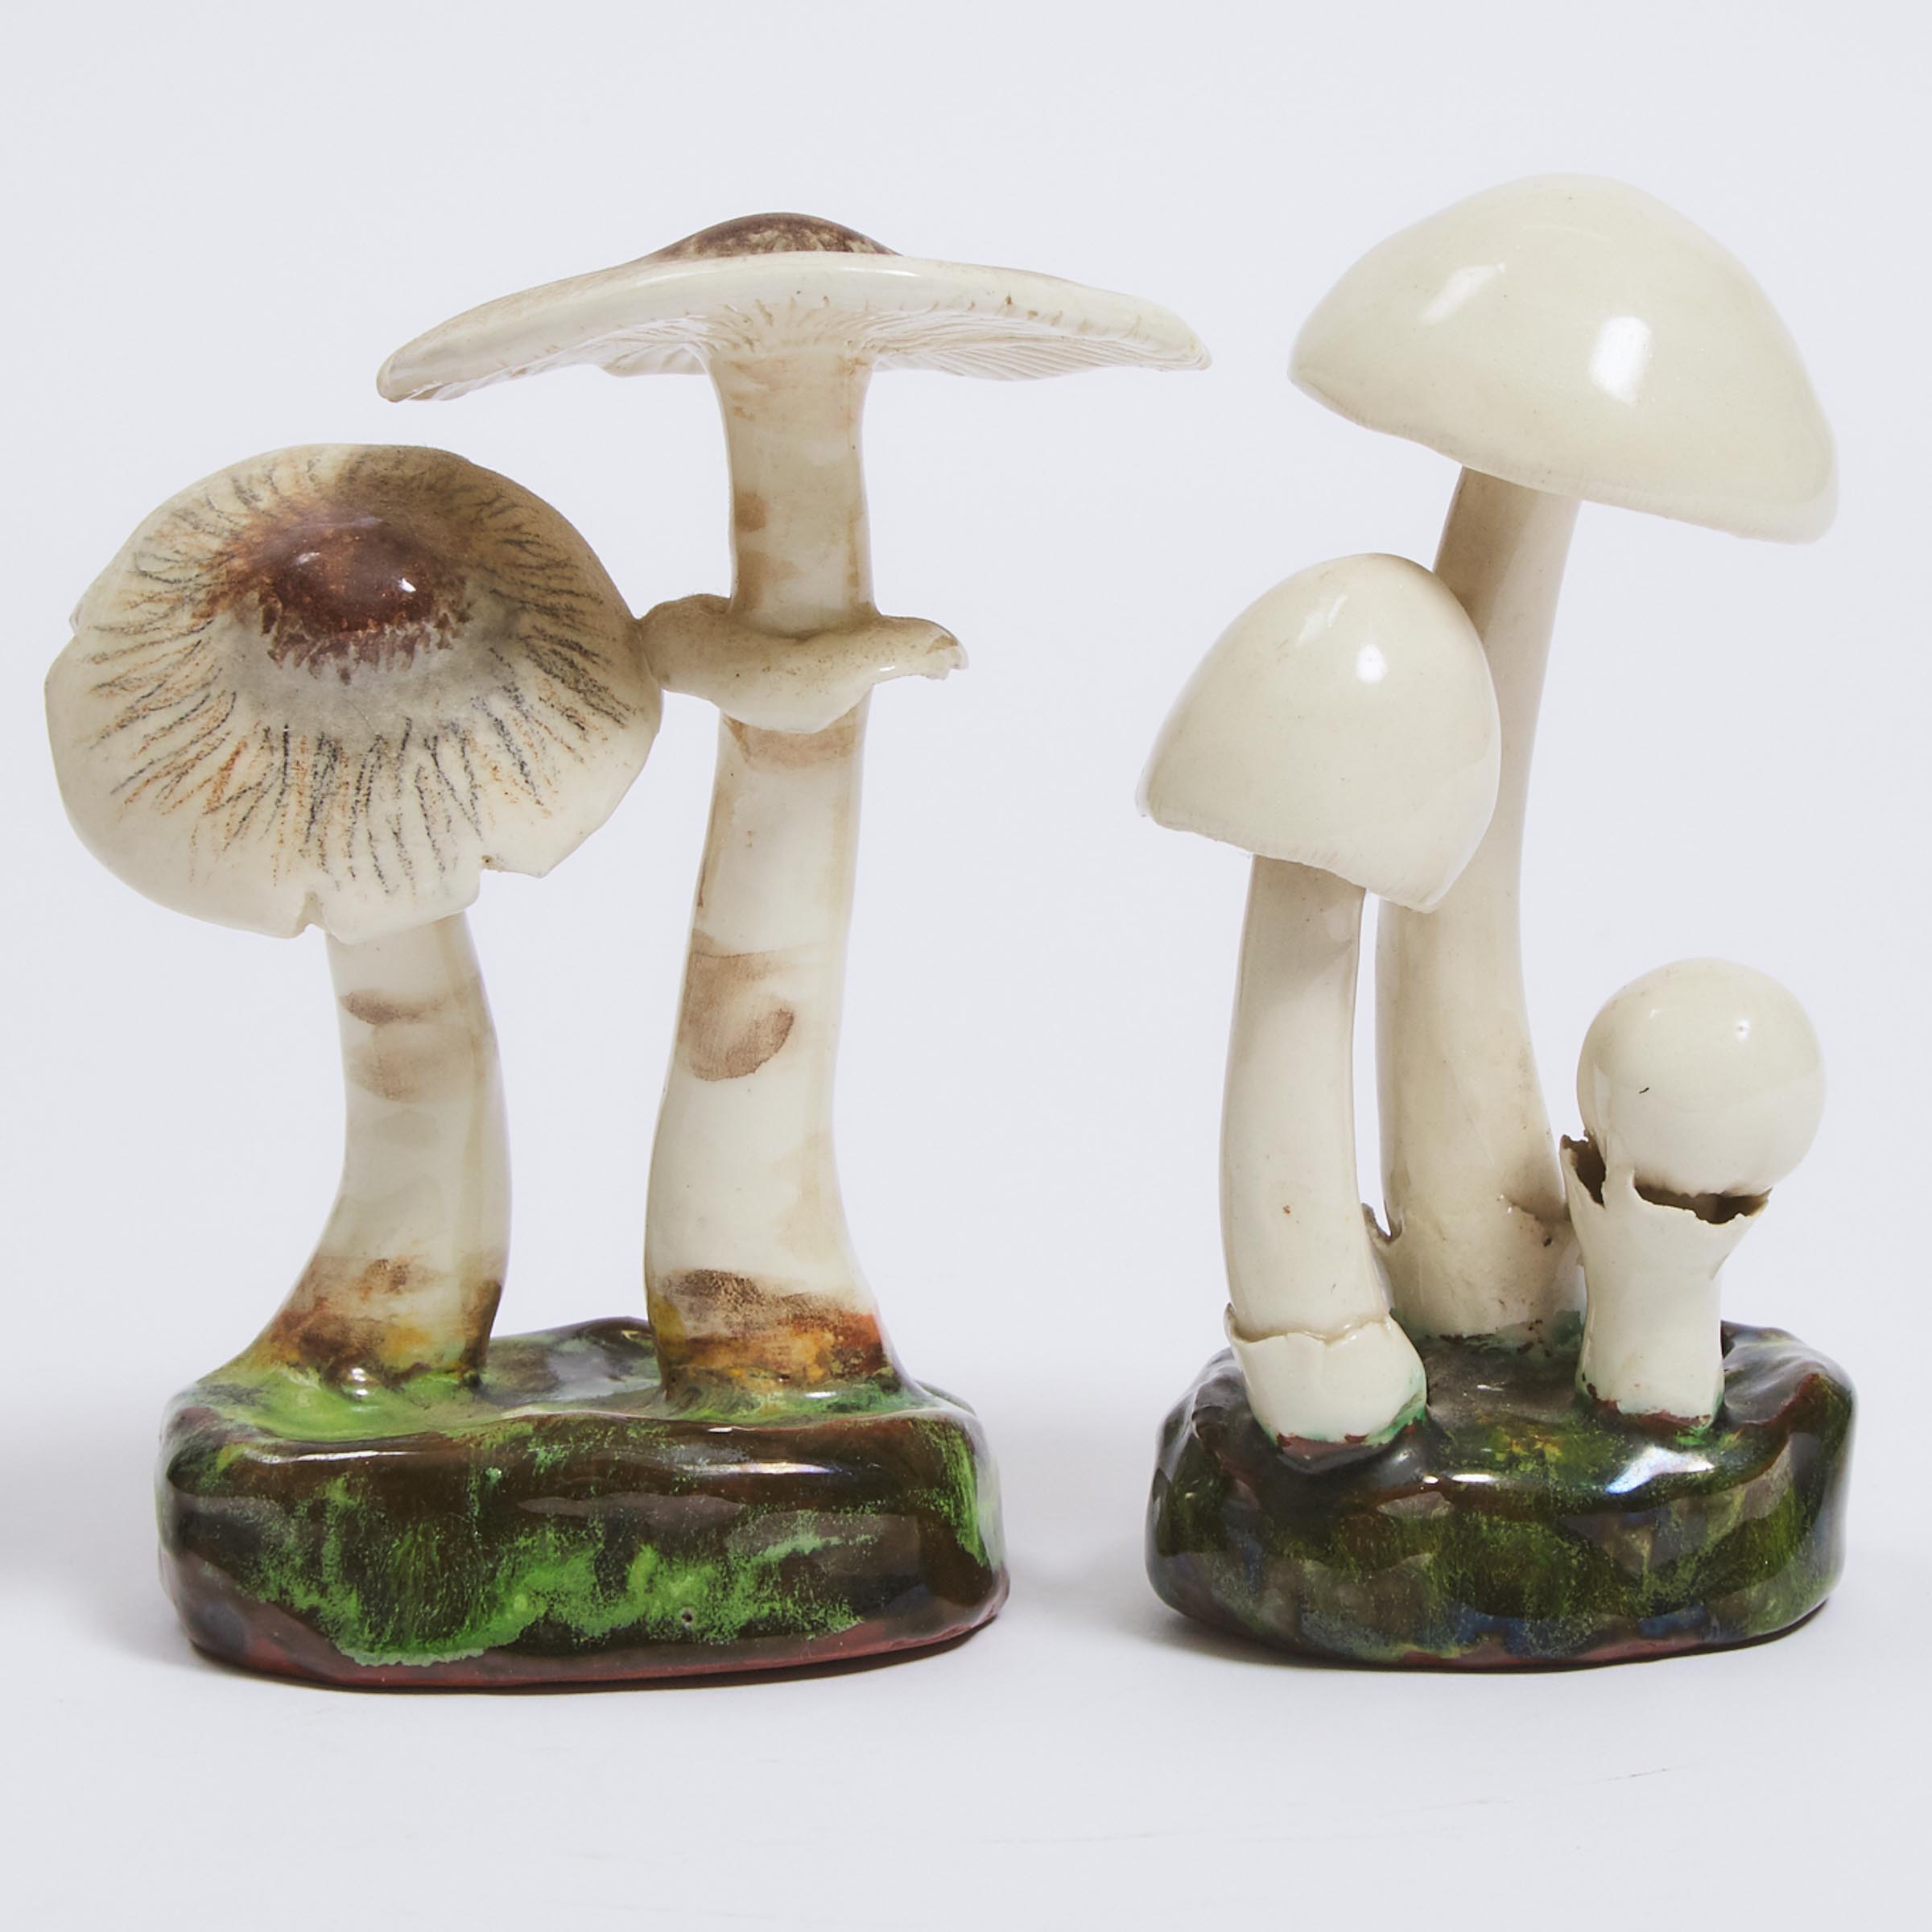 Two Lorenzen Pottery Mycological Groups, 20th century